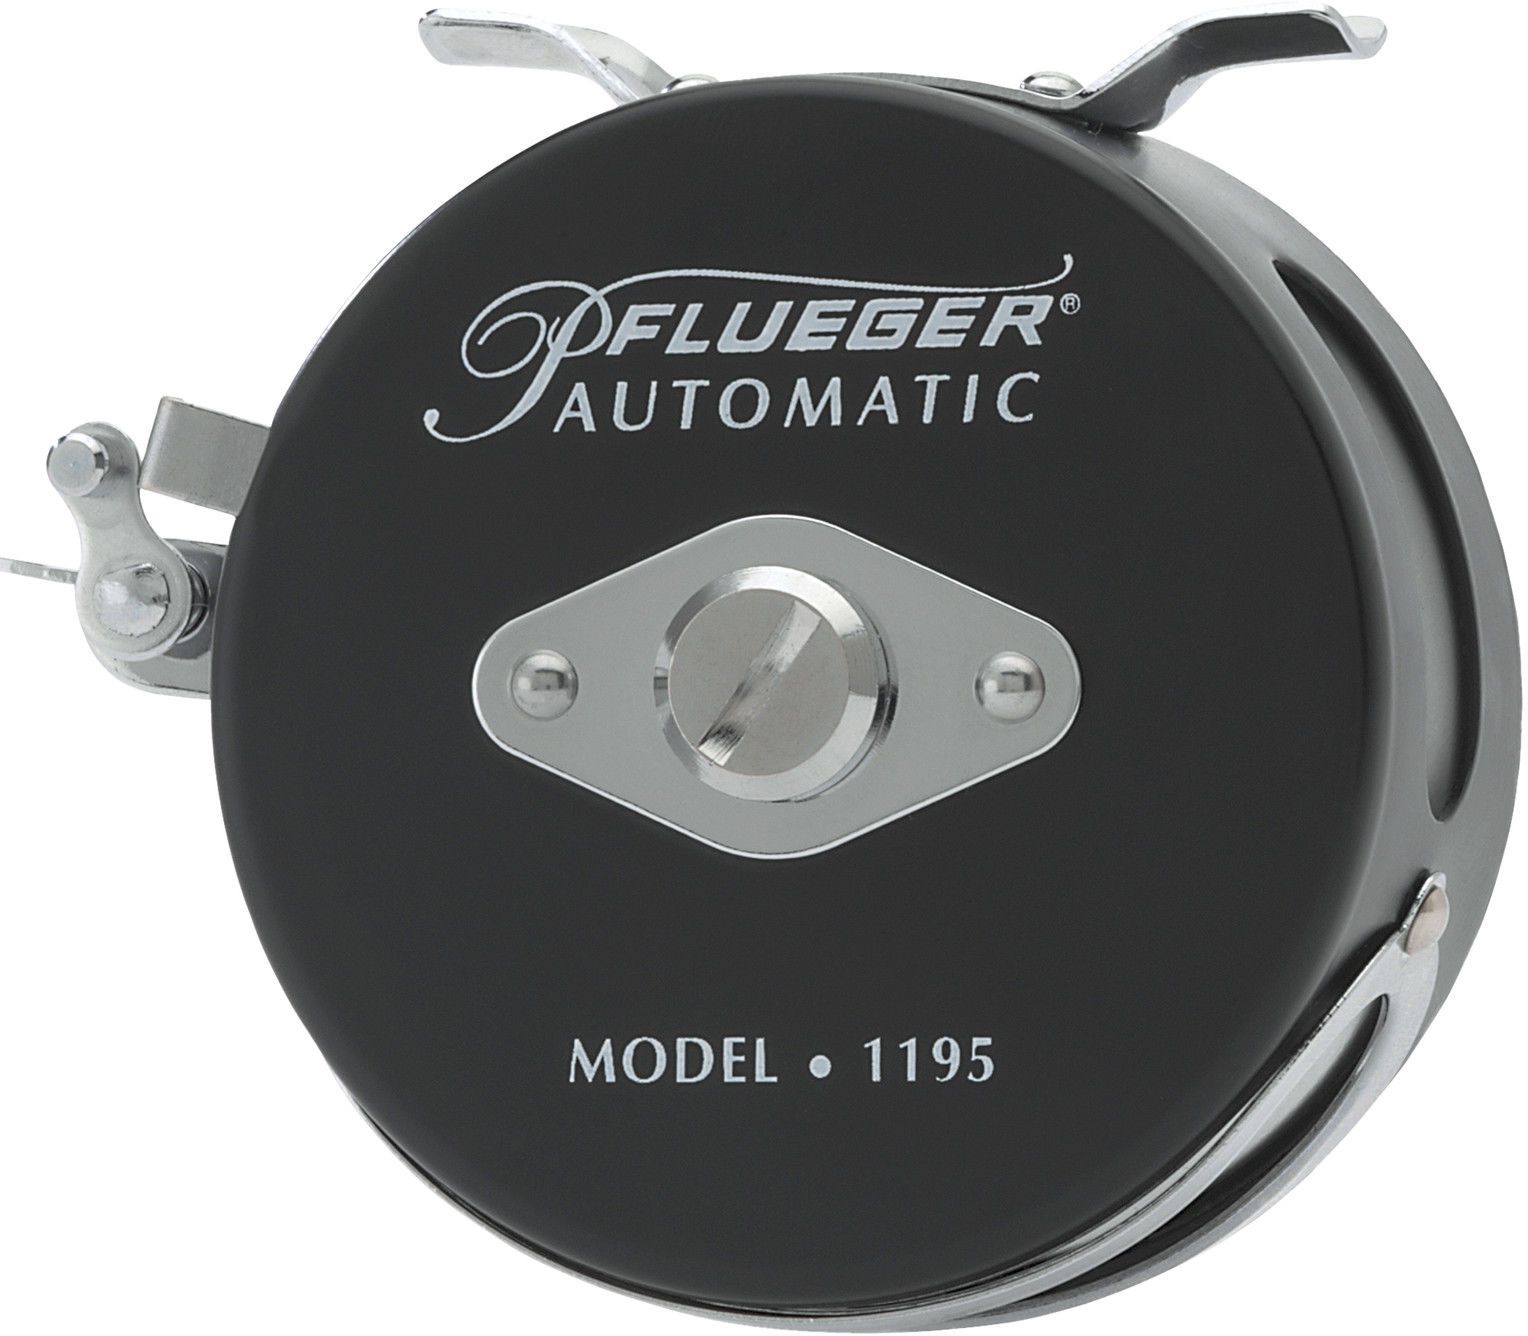 Dick's Sporting Goods Pflueger Automatic Fly Reel